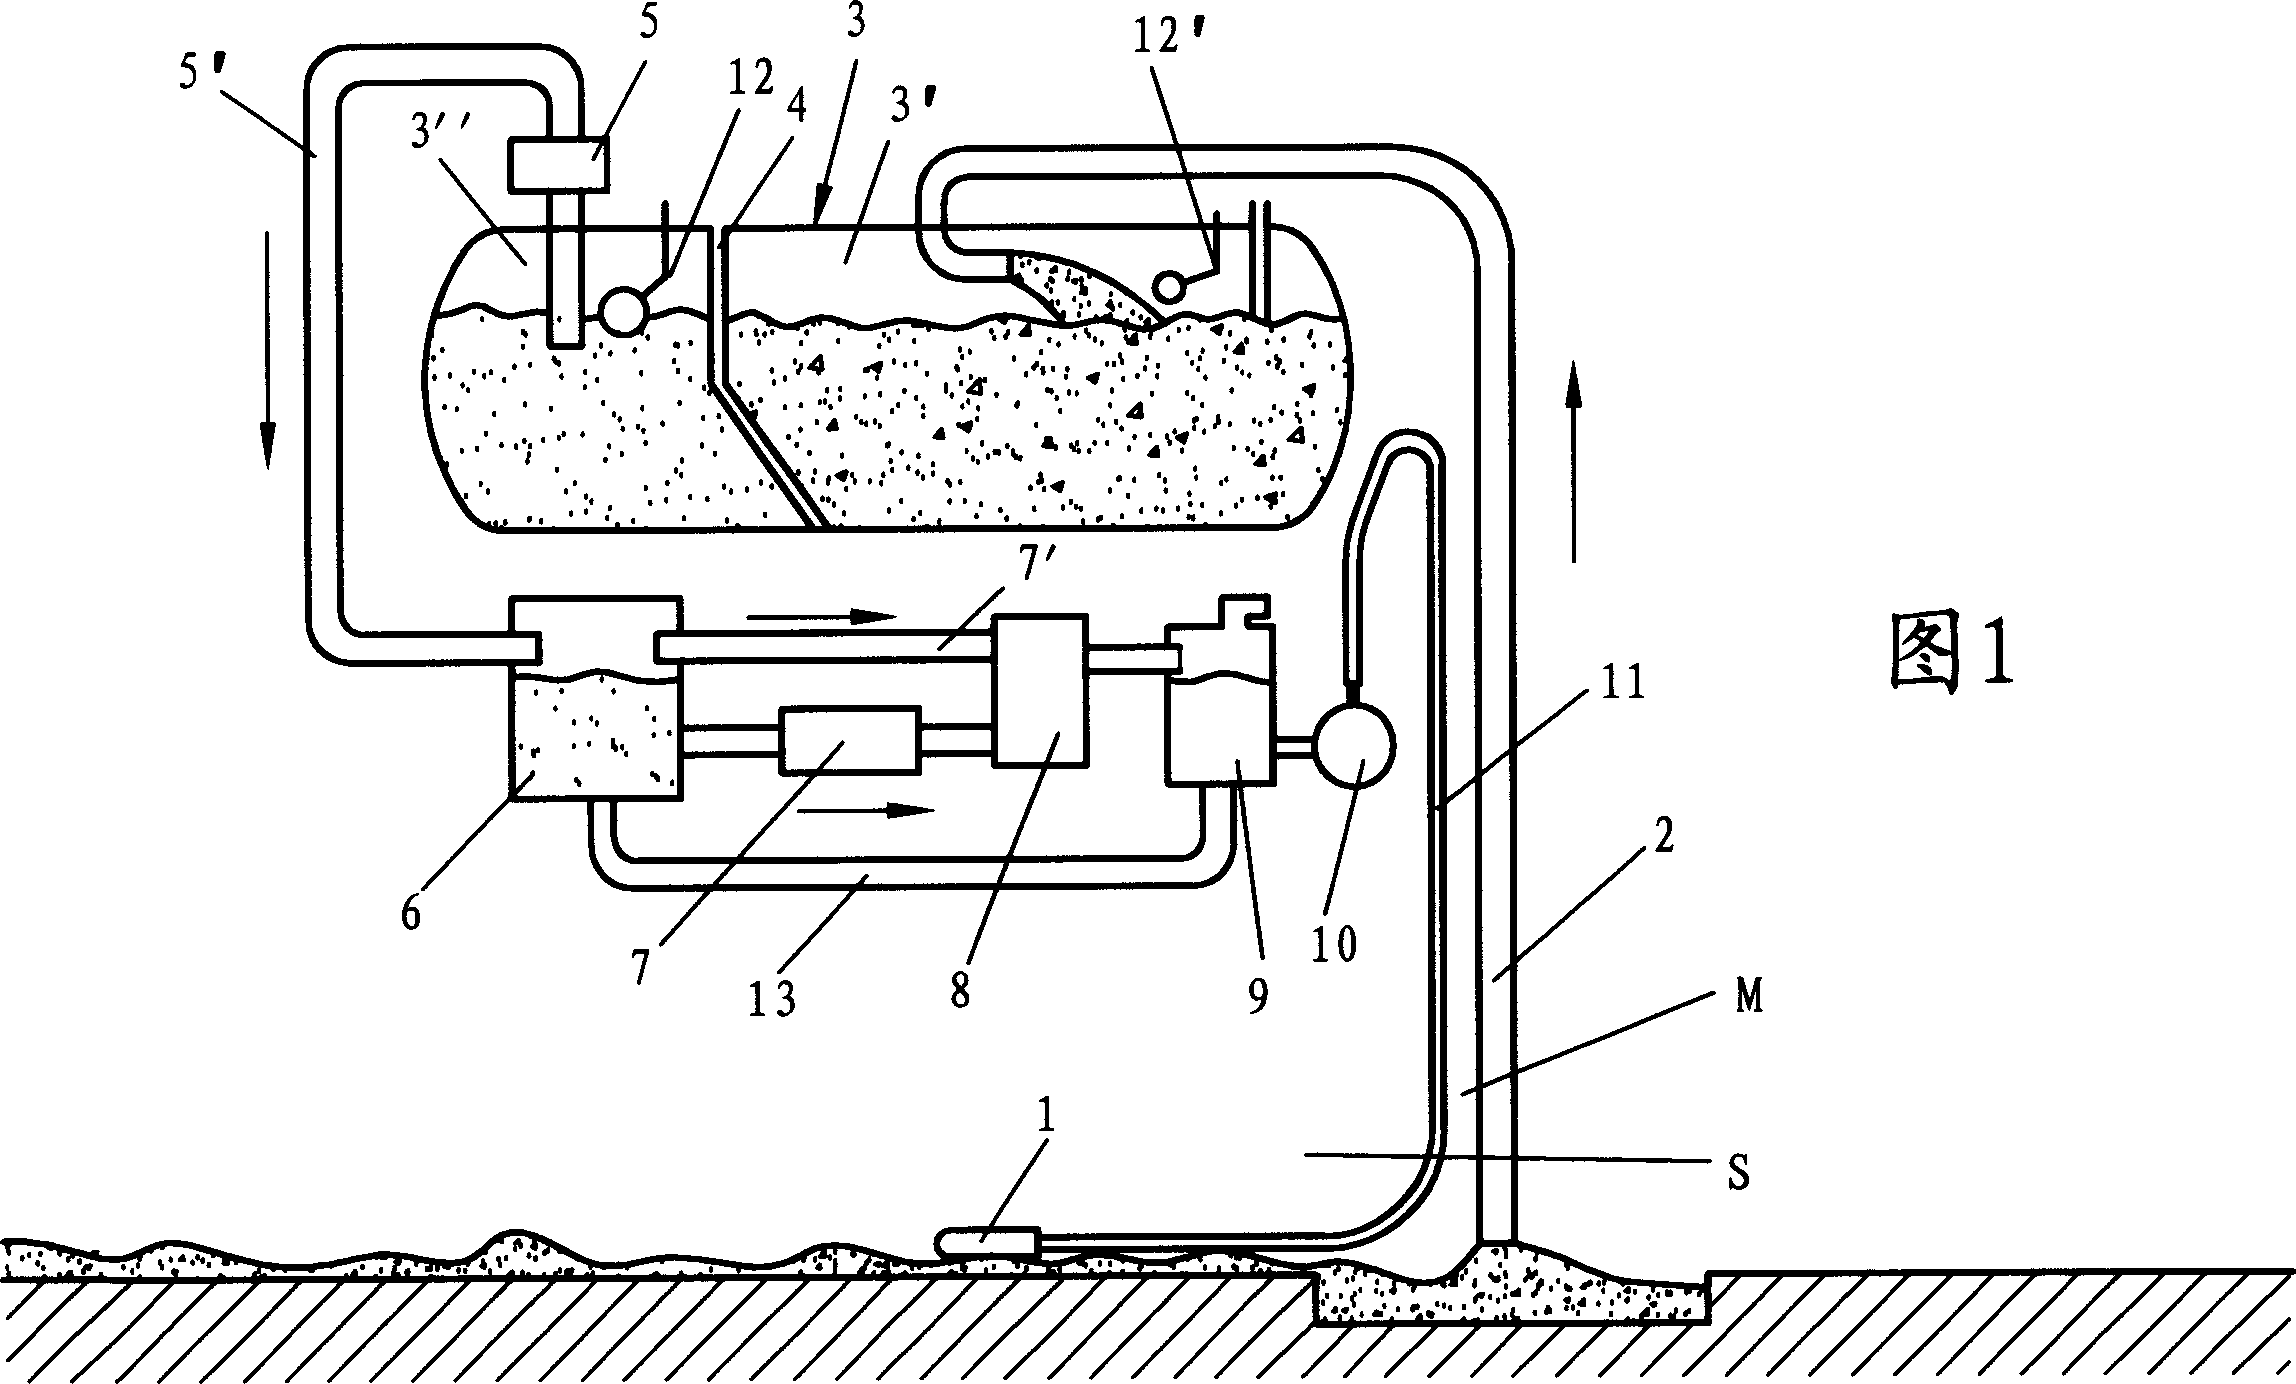 Apparatus for cleaning-out deposited sludge in fluid pool